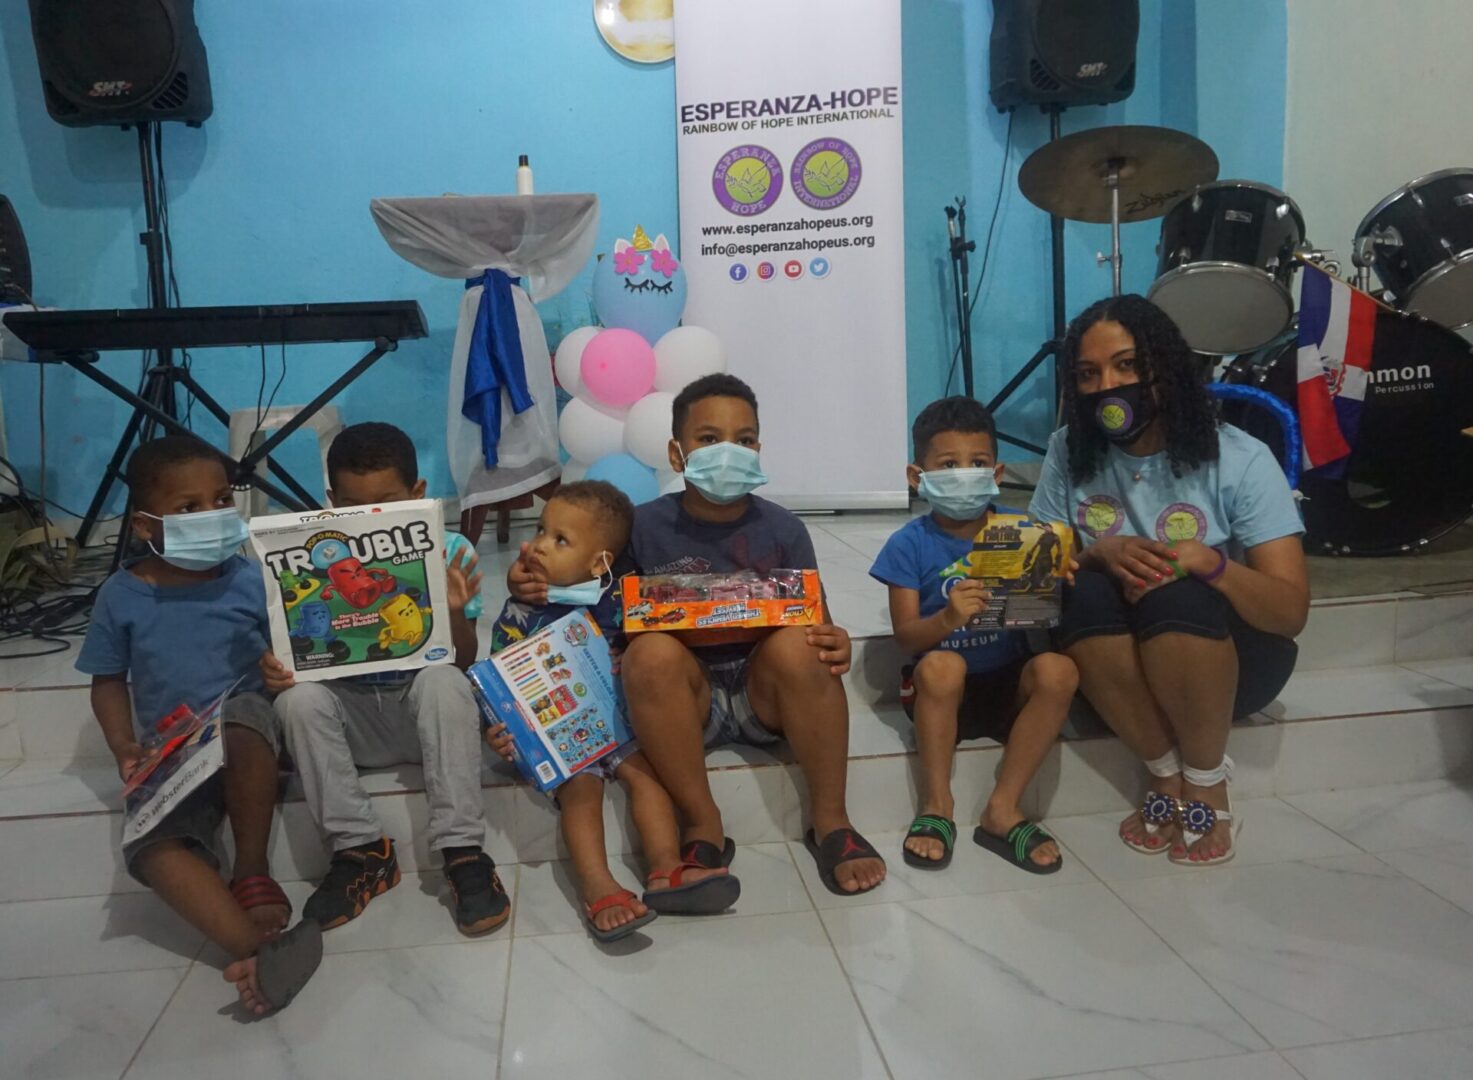 Our staff and five boys sitting near the drum set, holding their toys